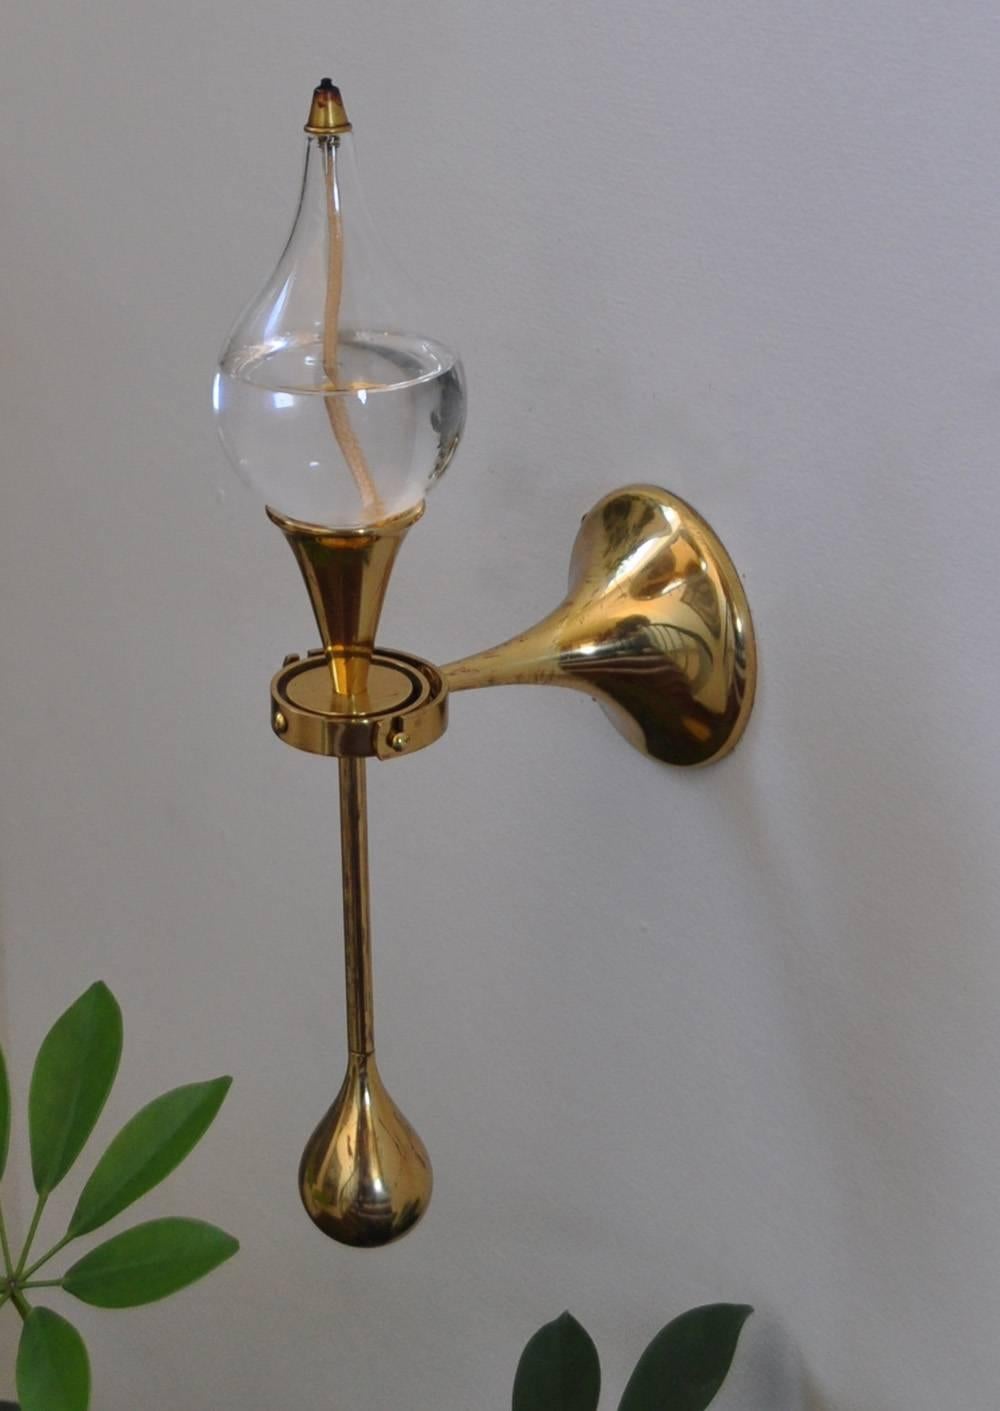 Set of two clear drop oil wall lamps by Freddie Andersen, Denmark in the 1970s.

A very decorative set of wall oil lamps made of solid brass and glass.
Also a hanging clear drop candelabra lamp available.

Dimensions: 
Height: 31 cm
Depth: